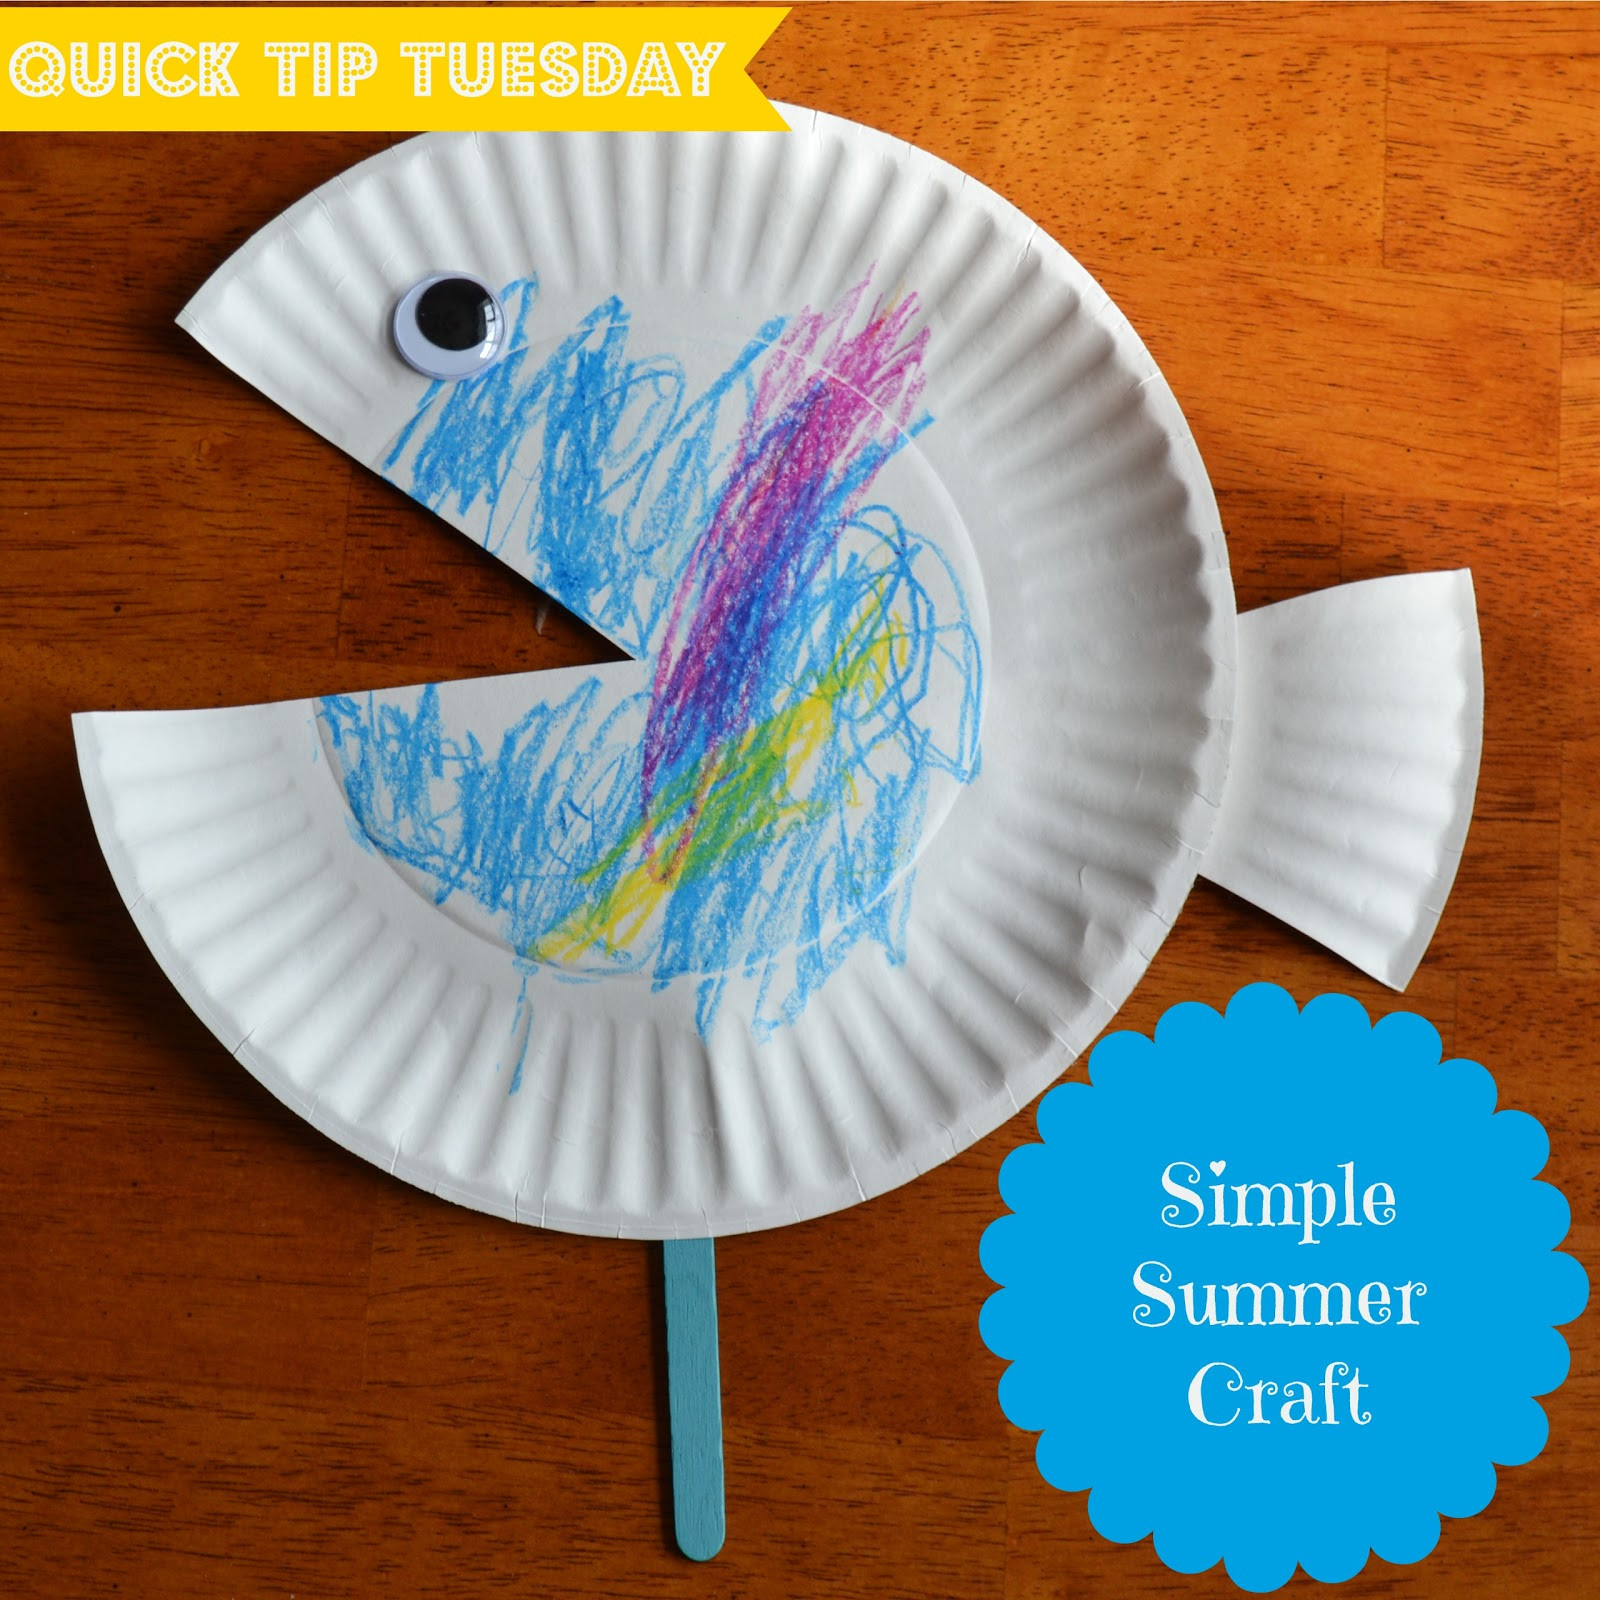 Easy Crafts For Preschoolers
 East Coast Mommy Quick Tip Tuesday 5 Simple Summer Craft